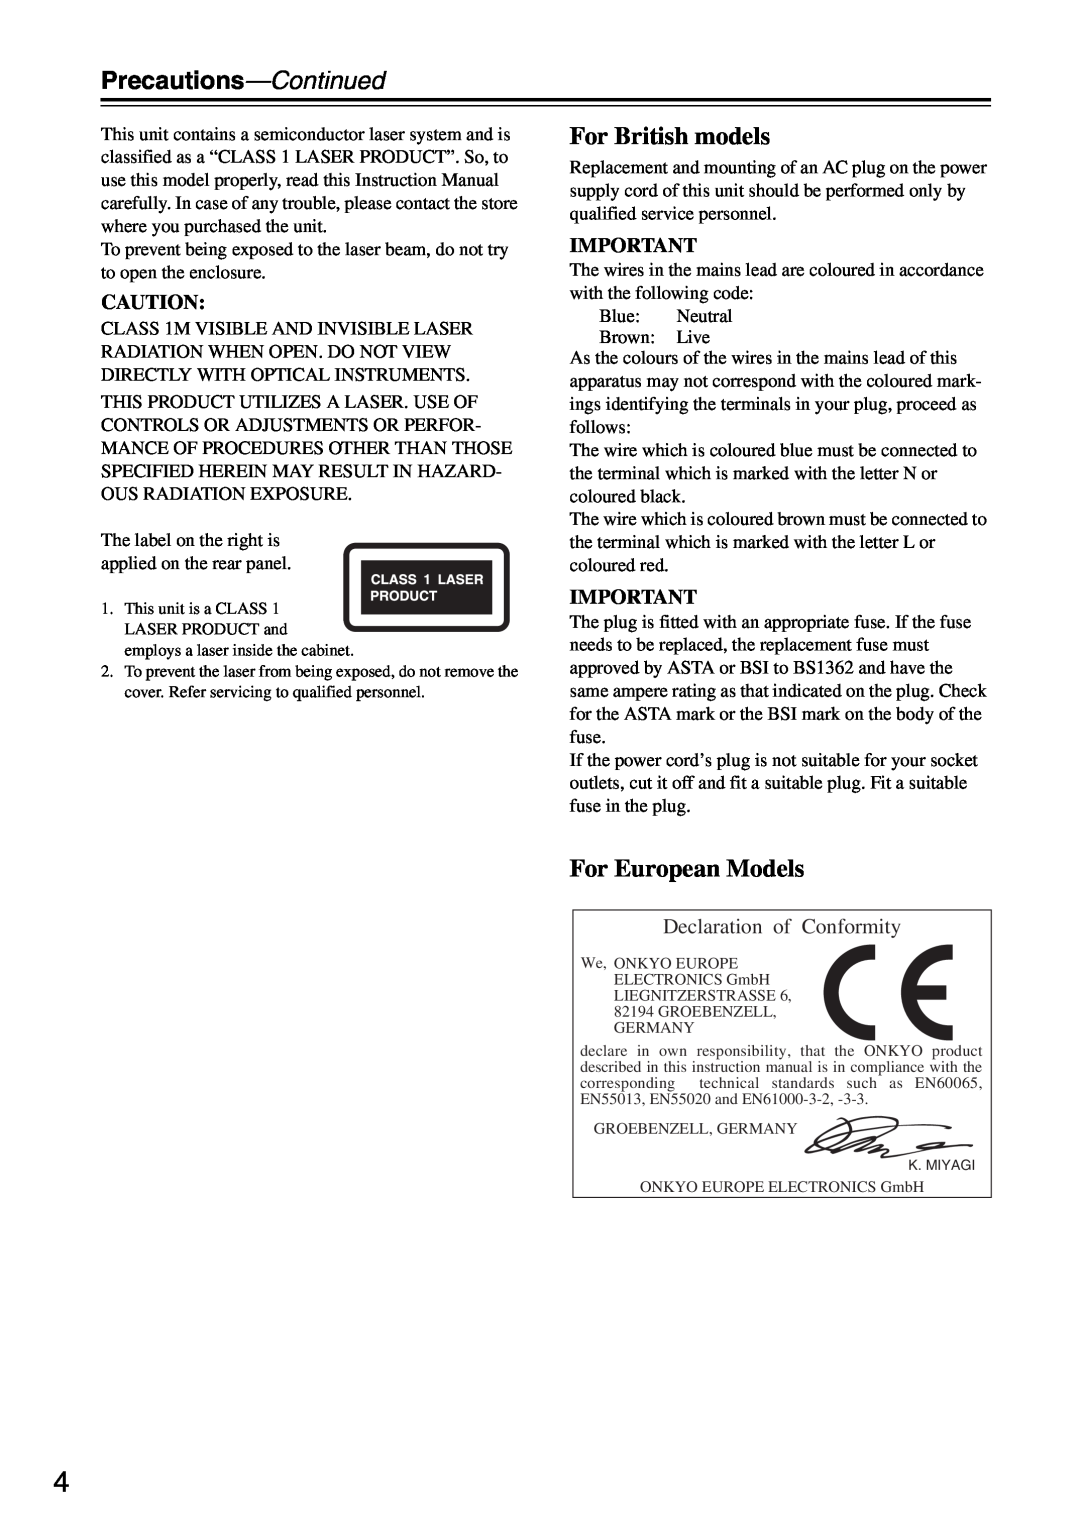 Onkyo DX-7355 instruction manual Precautions-Continued, For British models, For European Models, Declaration of Conformity 